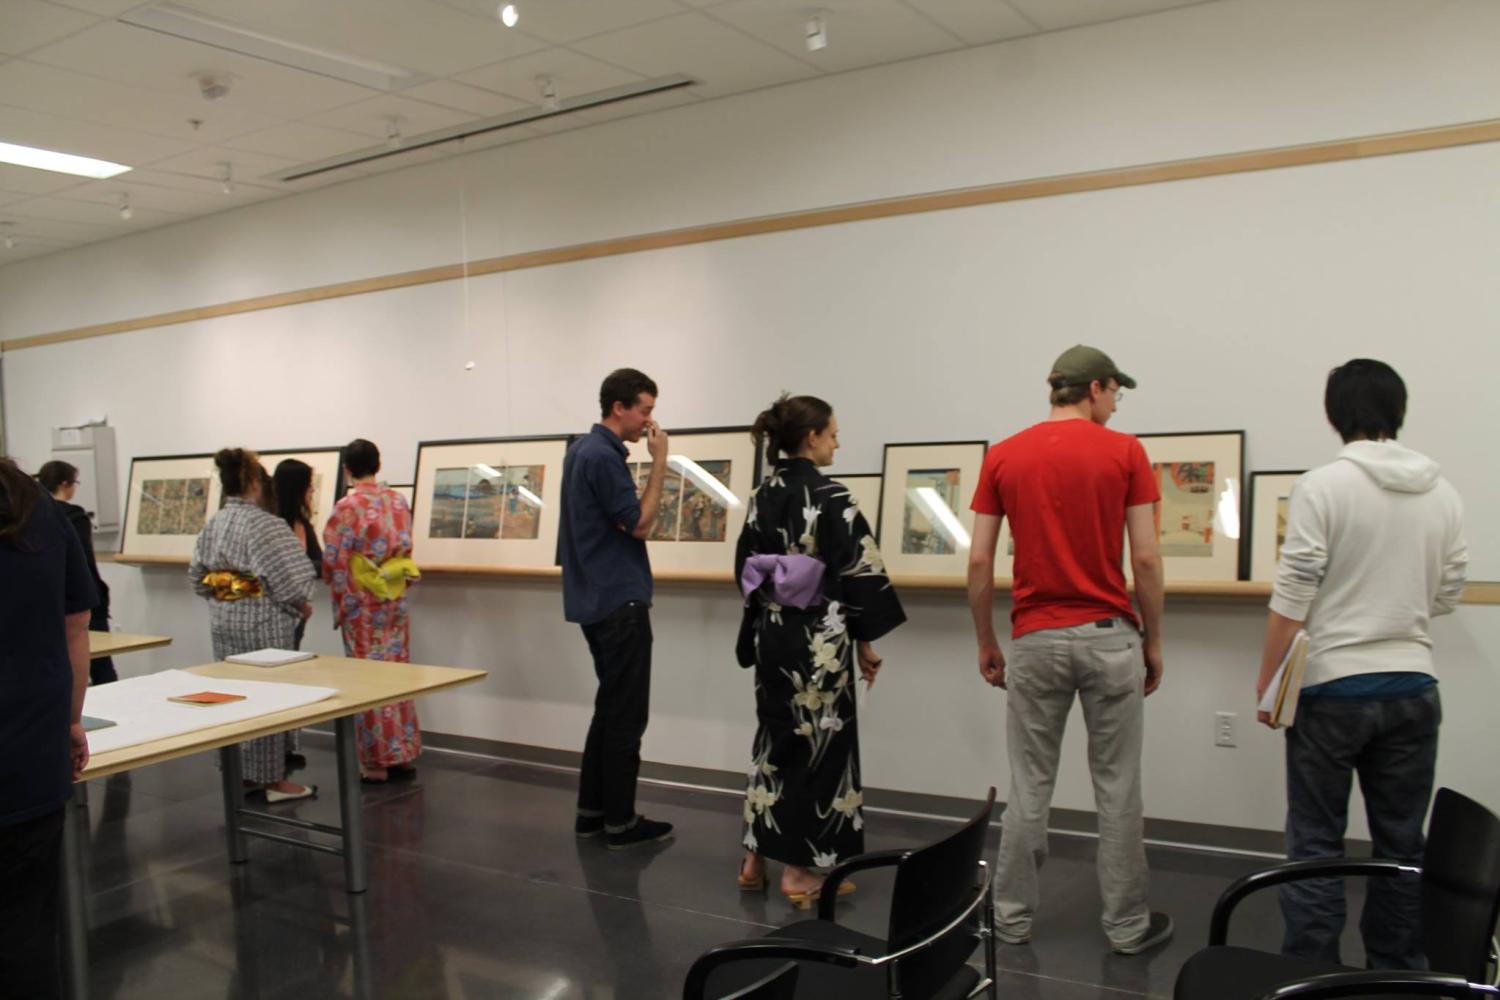 Students view framed prints on a wall.